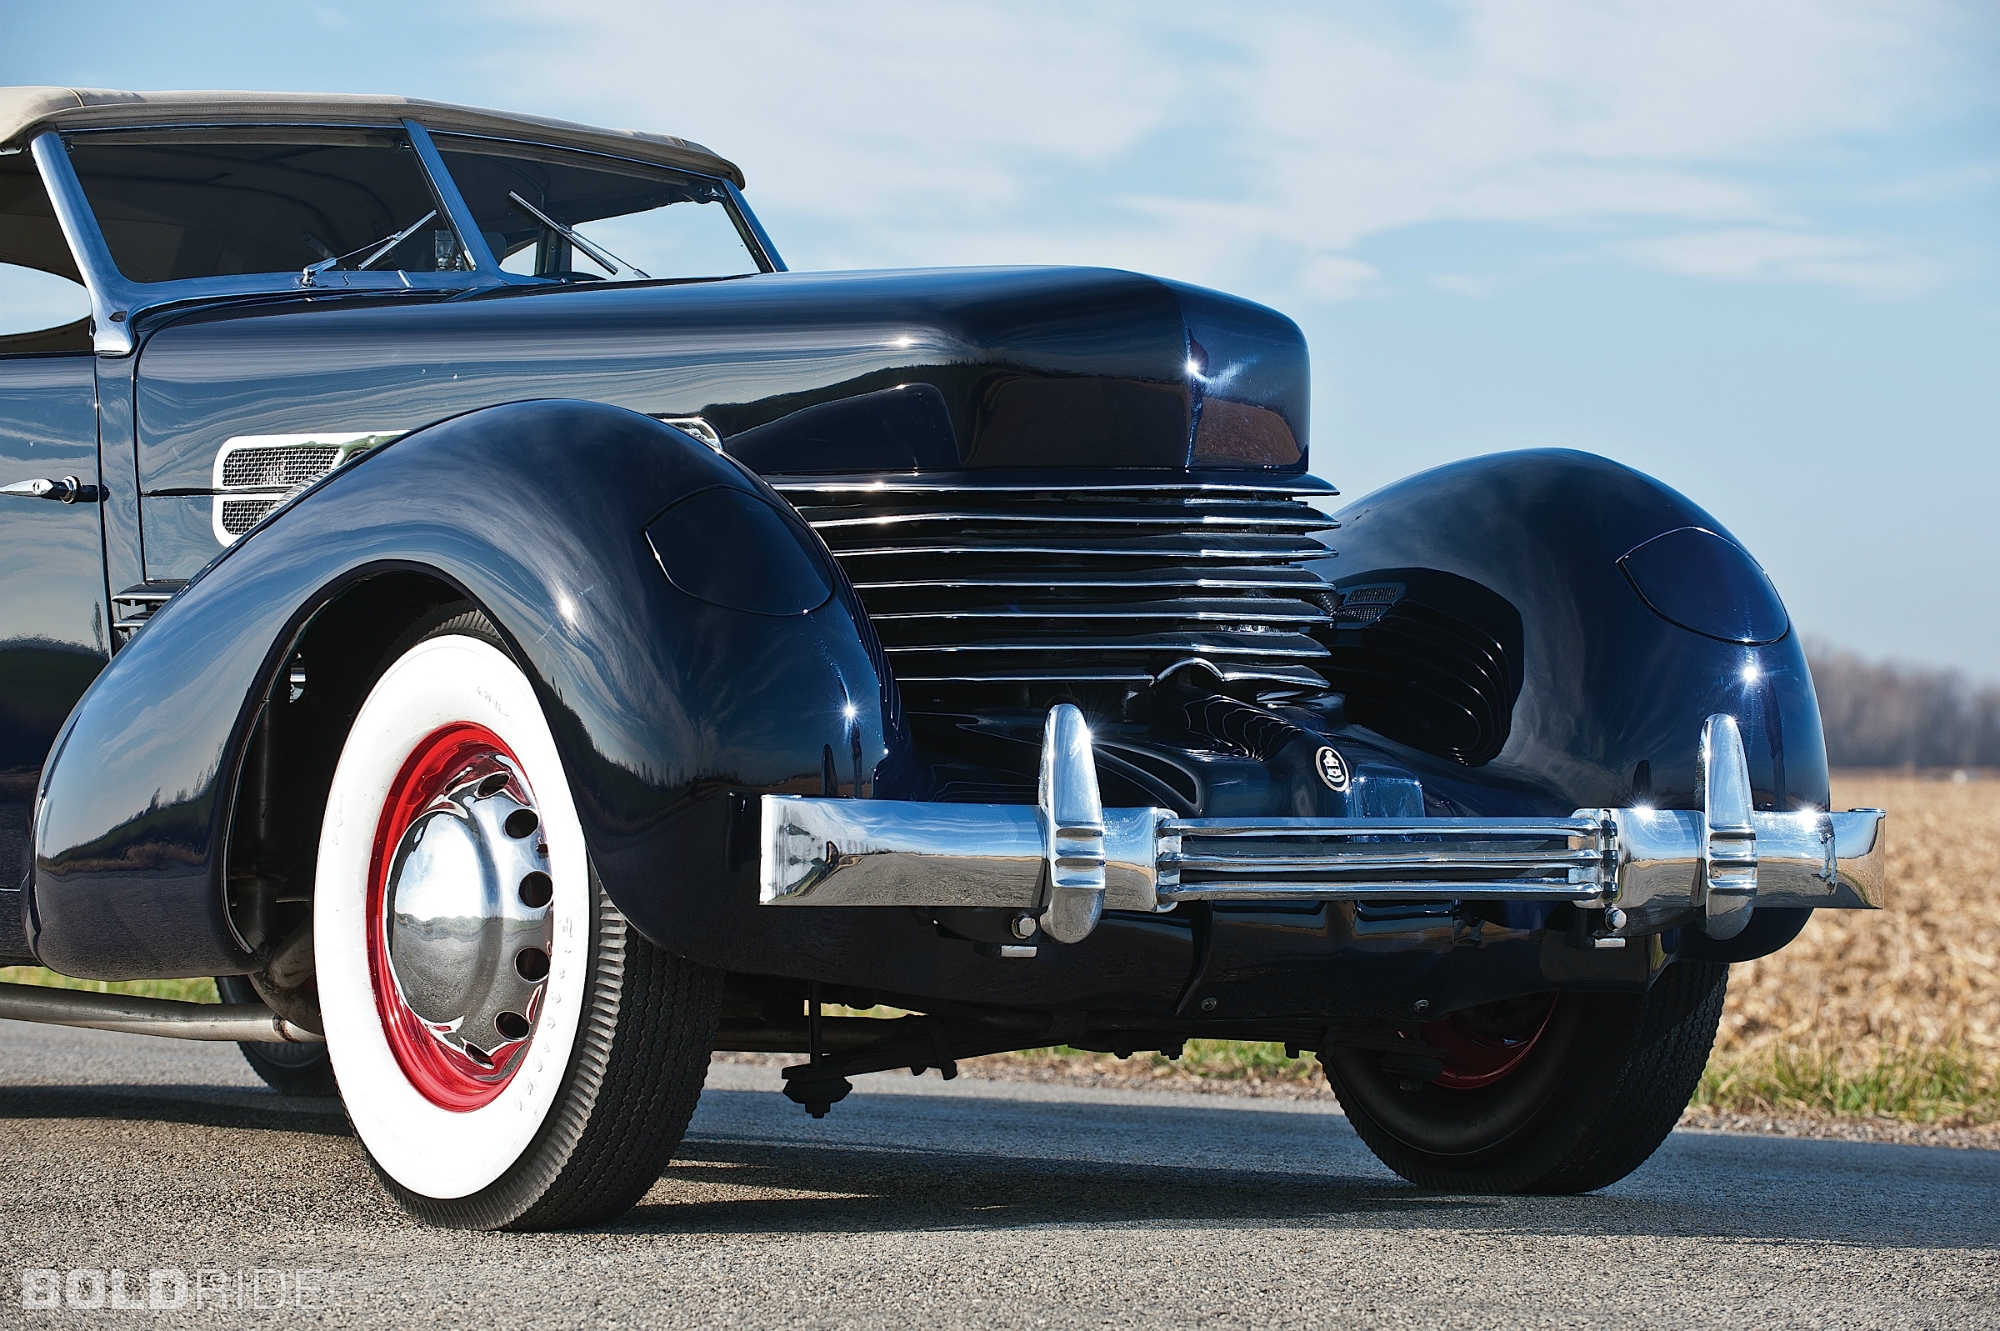 1936 Cord 810 Convertible Phaeton Boldride.com - Pictures, Wallpapers